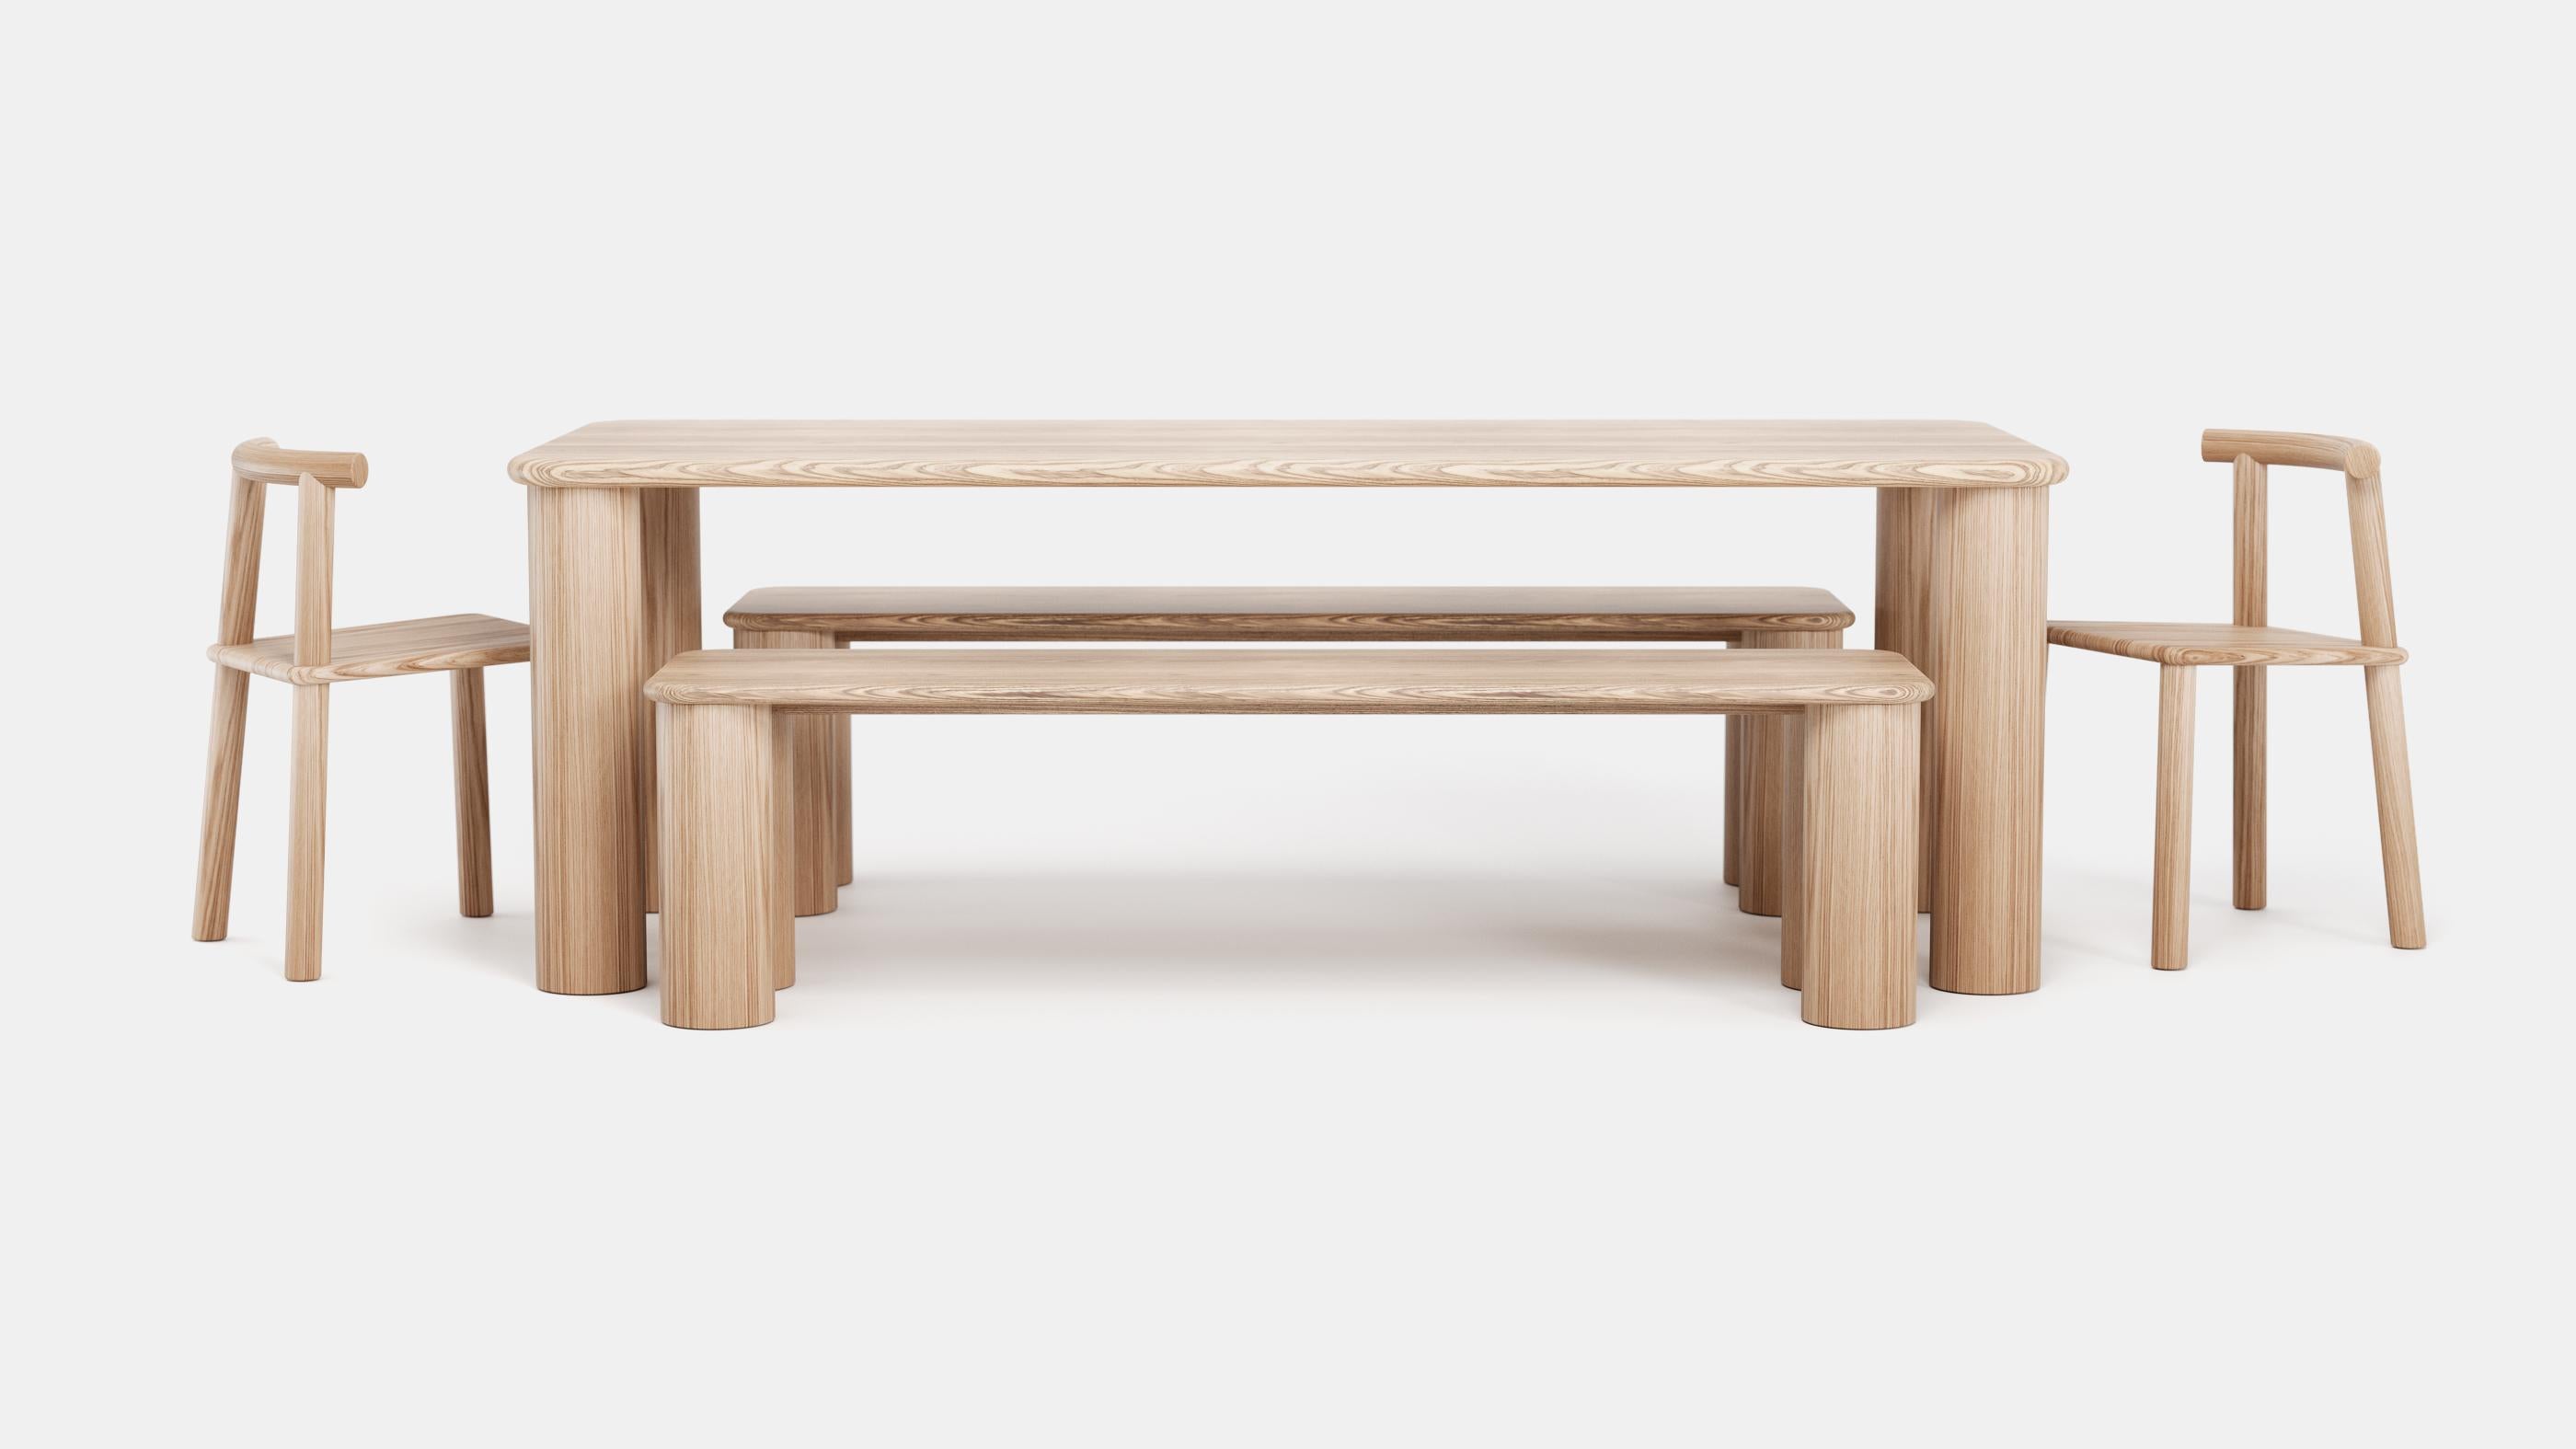 PAUSE is a captivating dining bench that invites you to savor life's moments. Handcrafted from locally sourced red oak, it boasts a clear matte lacquer finish that showcases its natural allure. With its striking interplay of a slender top and